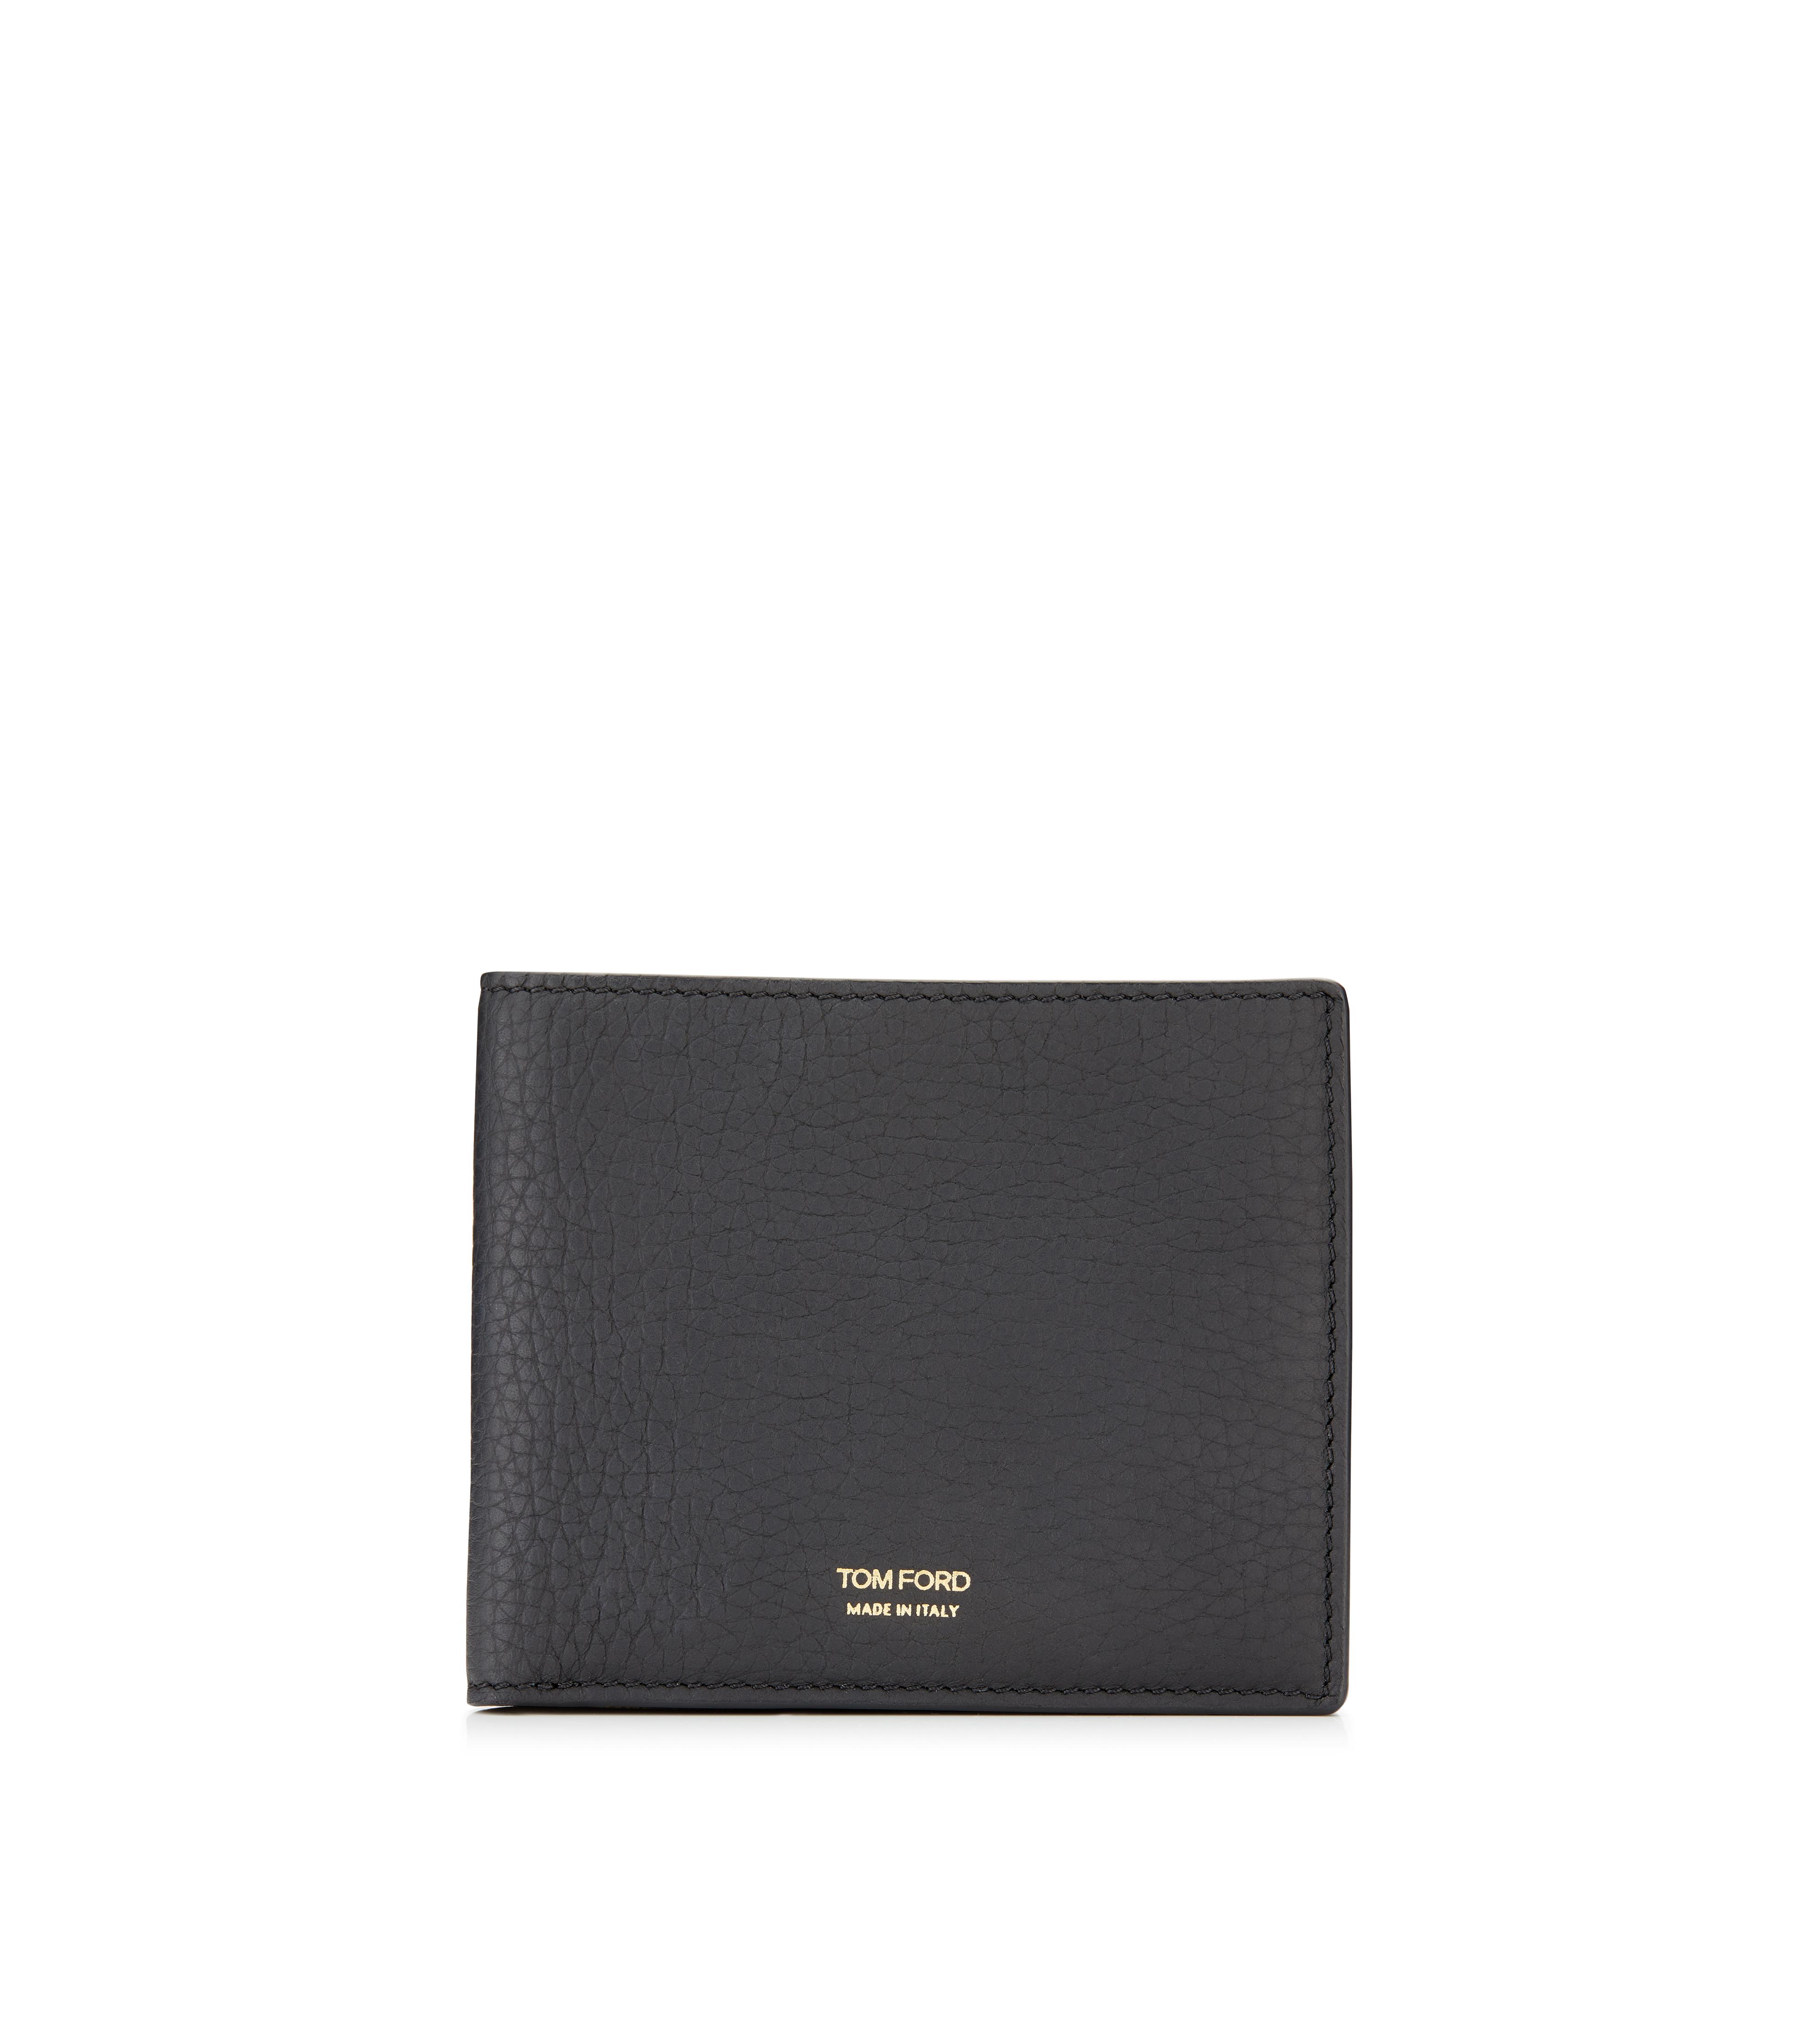 Small Leather Goods - Men's Accessories | TomFord.com